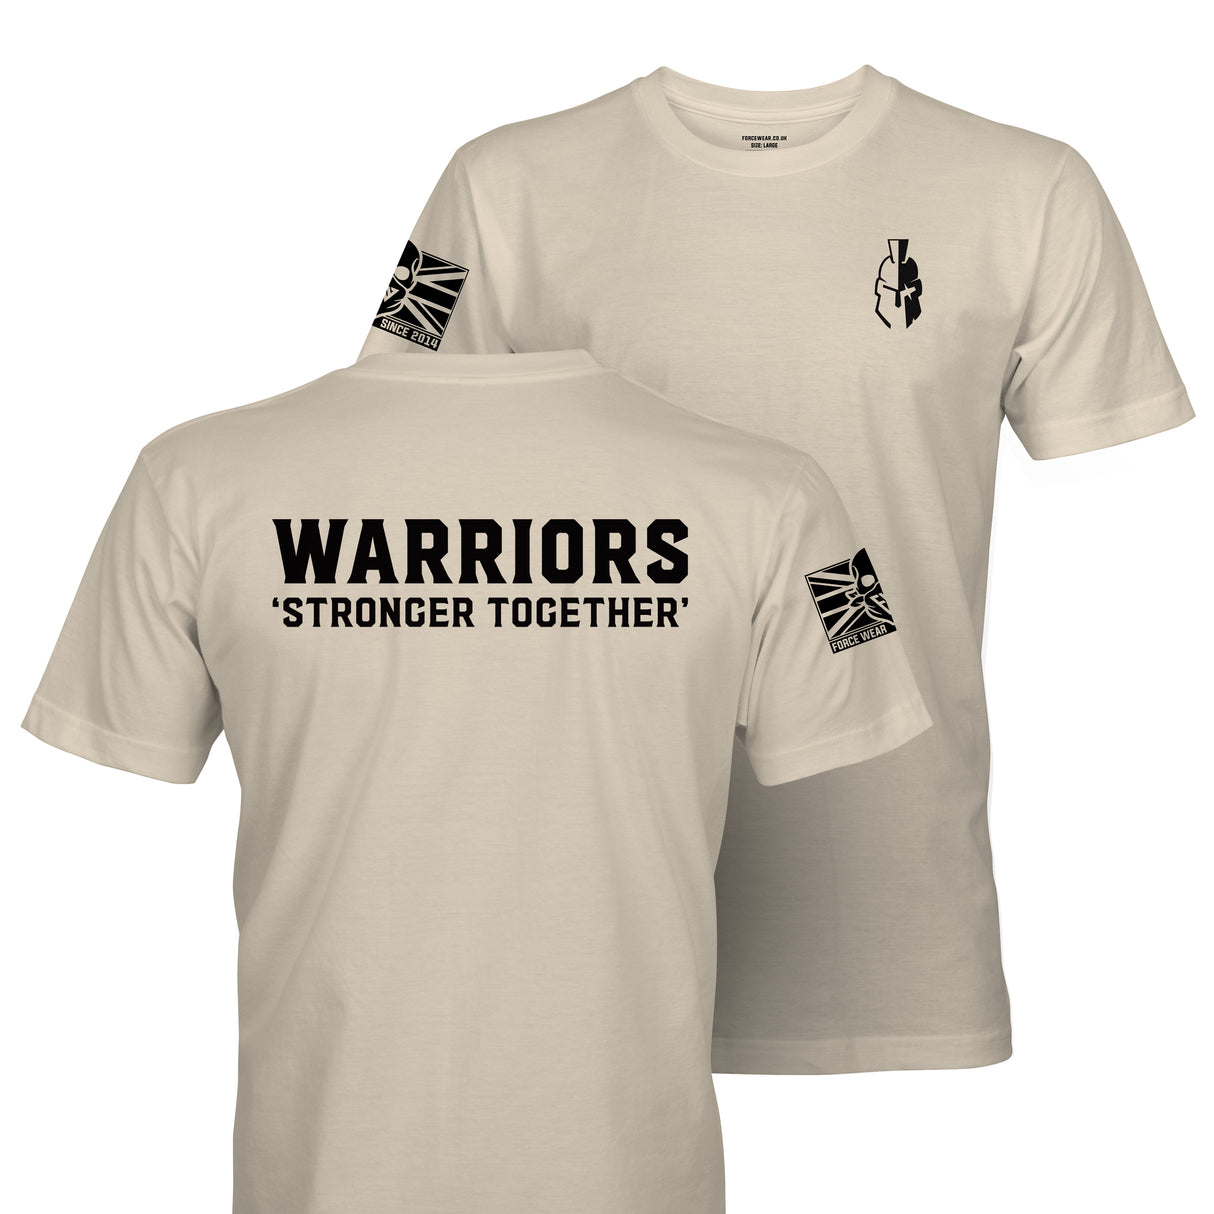 WARRIORS MOTTO TAG AND BACK